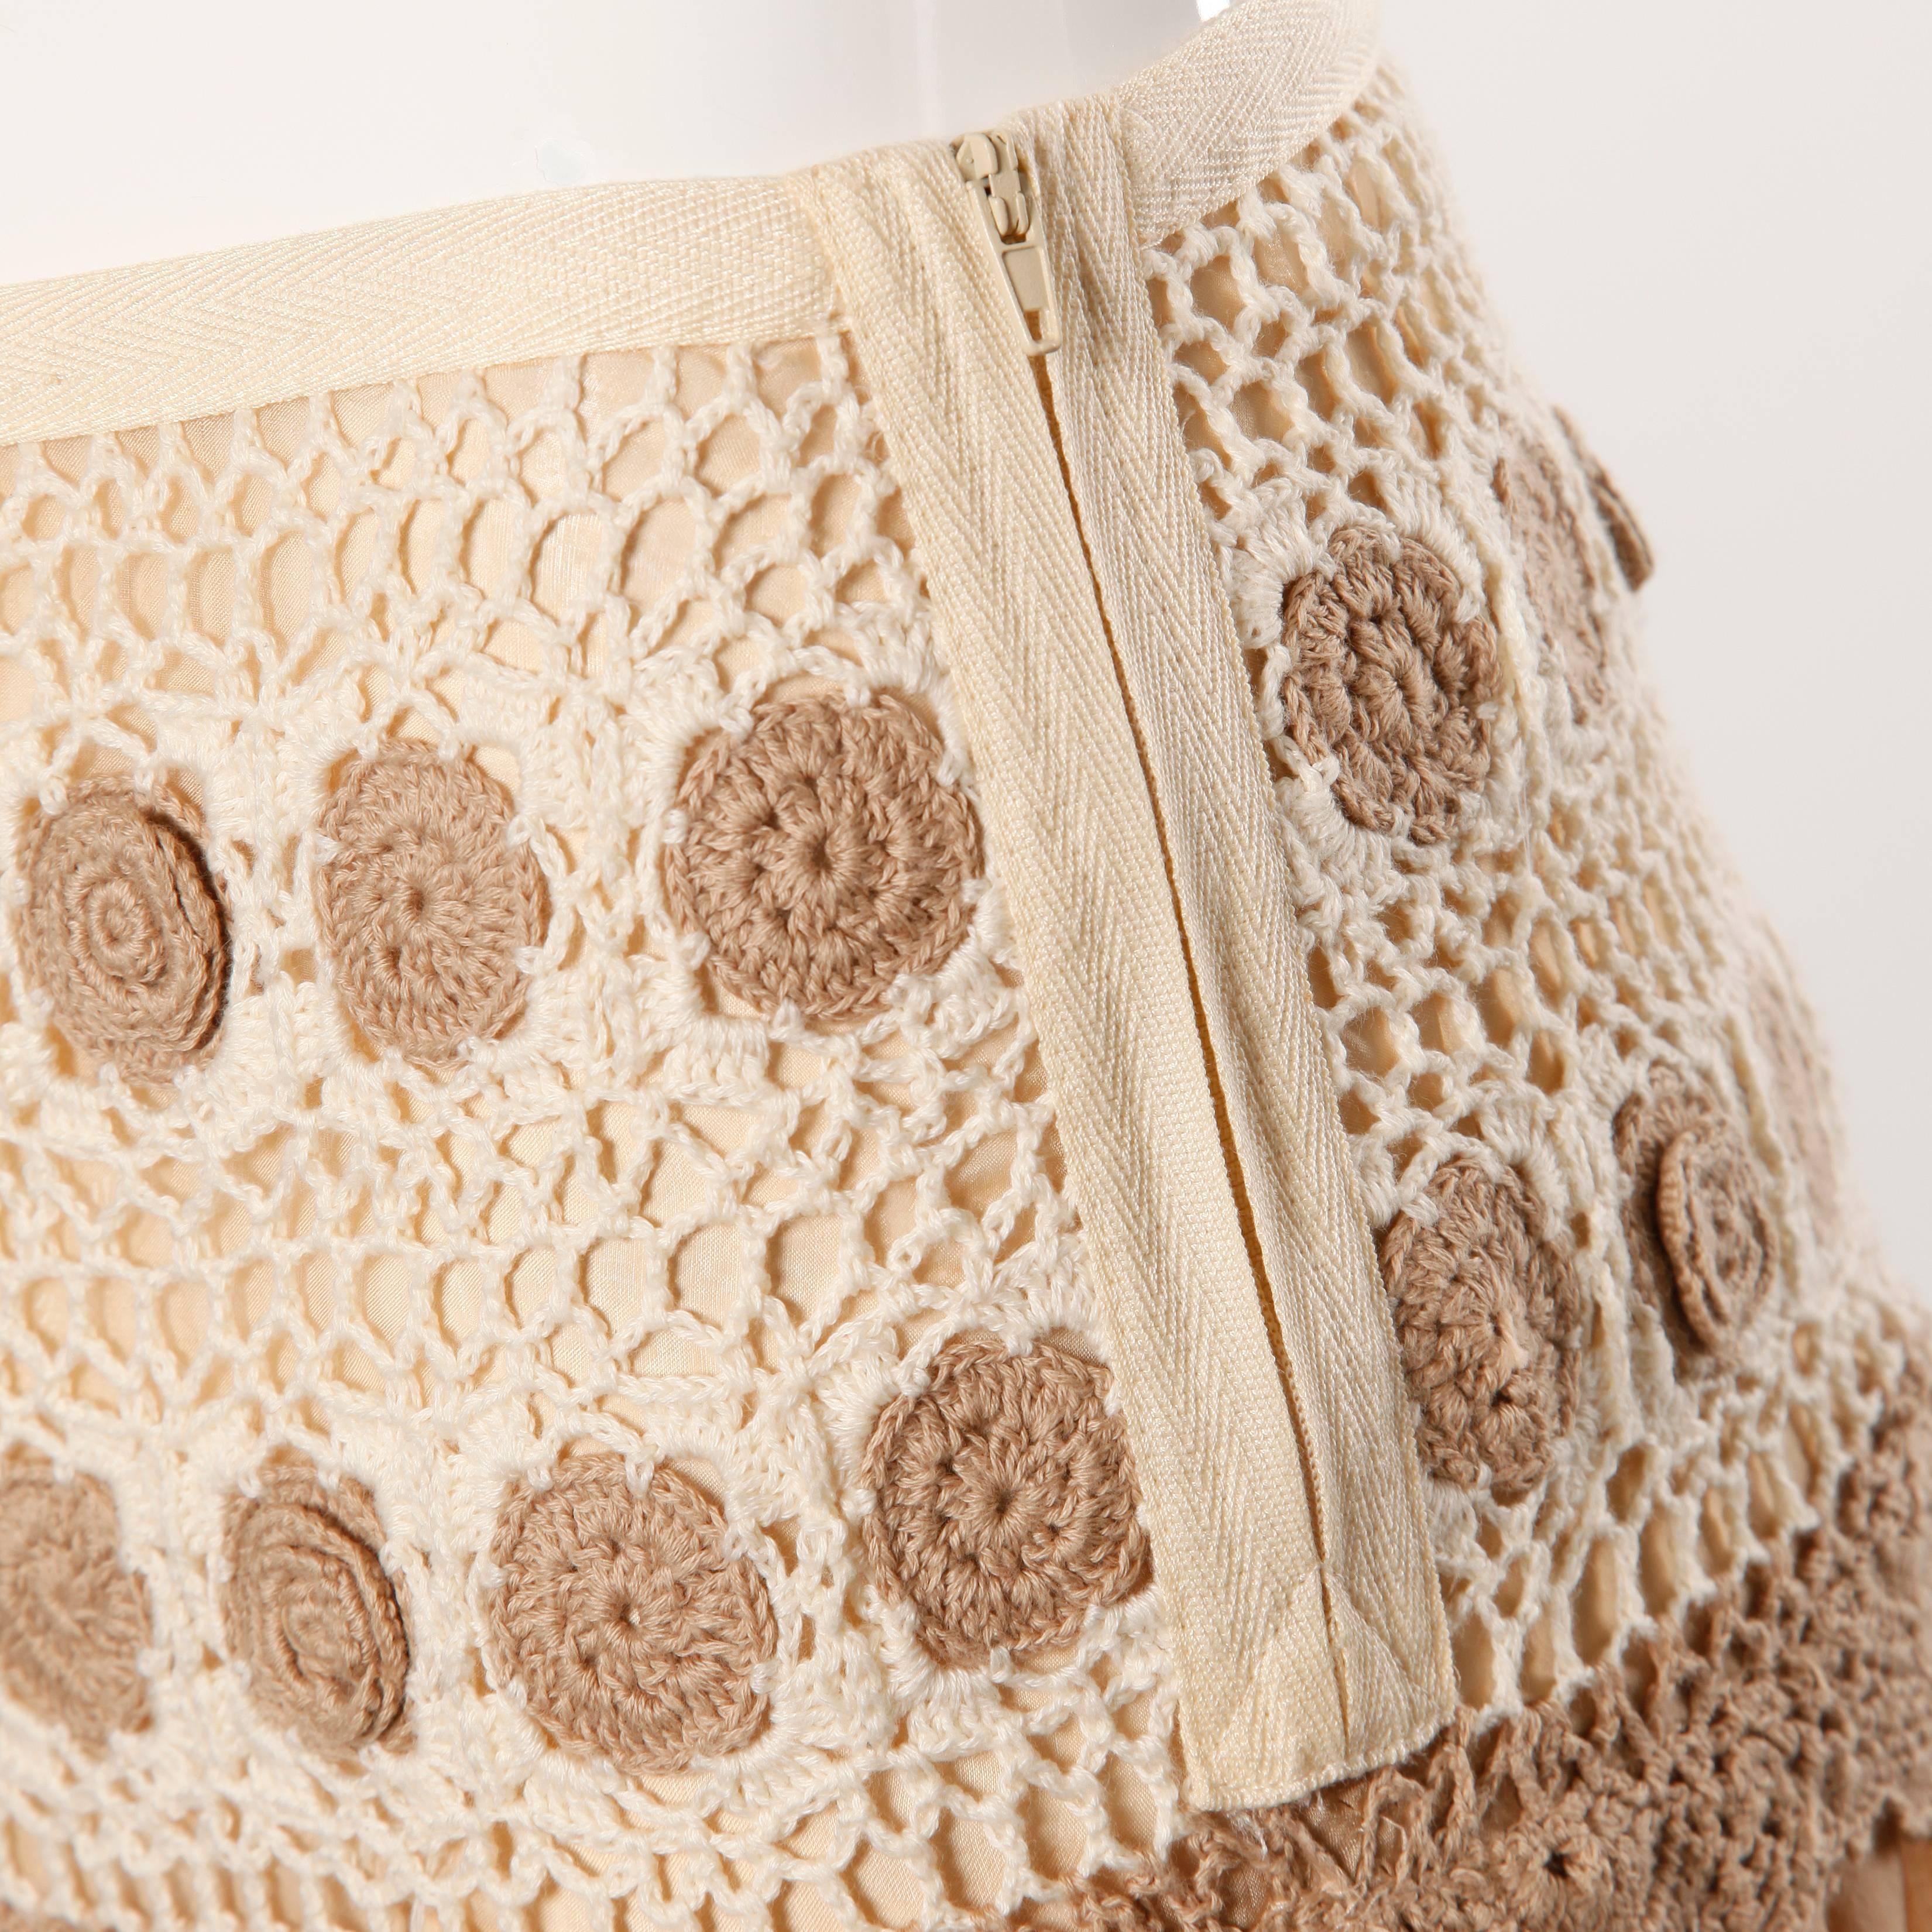 Delicate nude silk skirt with crochet detail by Blumarine. Pom pom trim and double side zippers.

Details: 

Fully Lined in Silk 
Side Zip on Both Sides
Marked Size: I 38/ D 32
Color: Beige
Fabric: Silk/ Crochet
Label: Blumarine

Measurements: